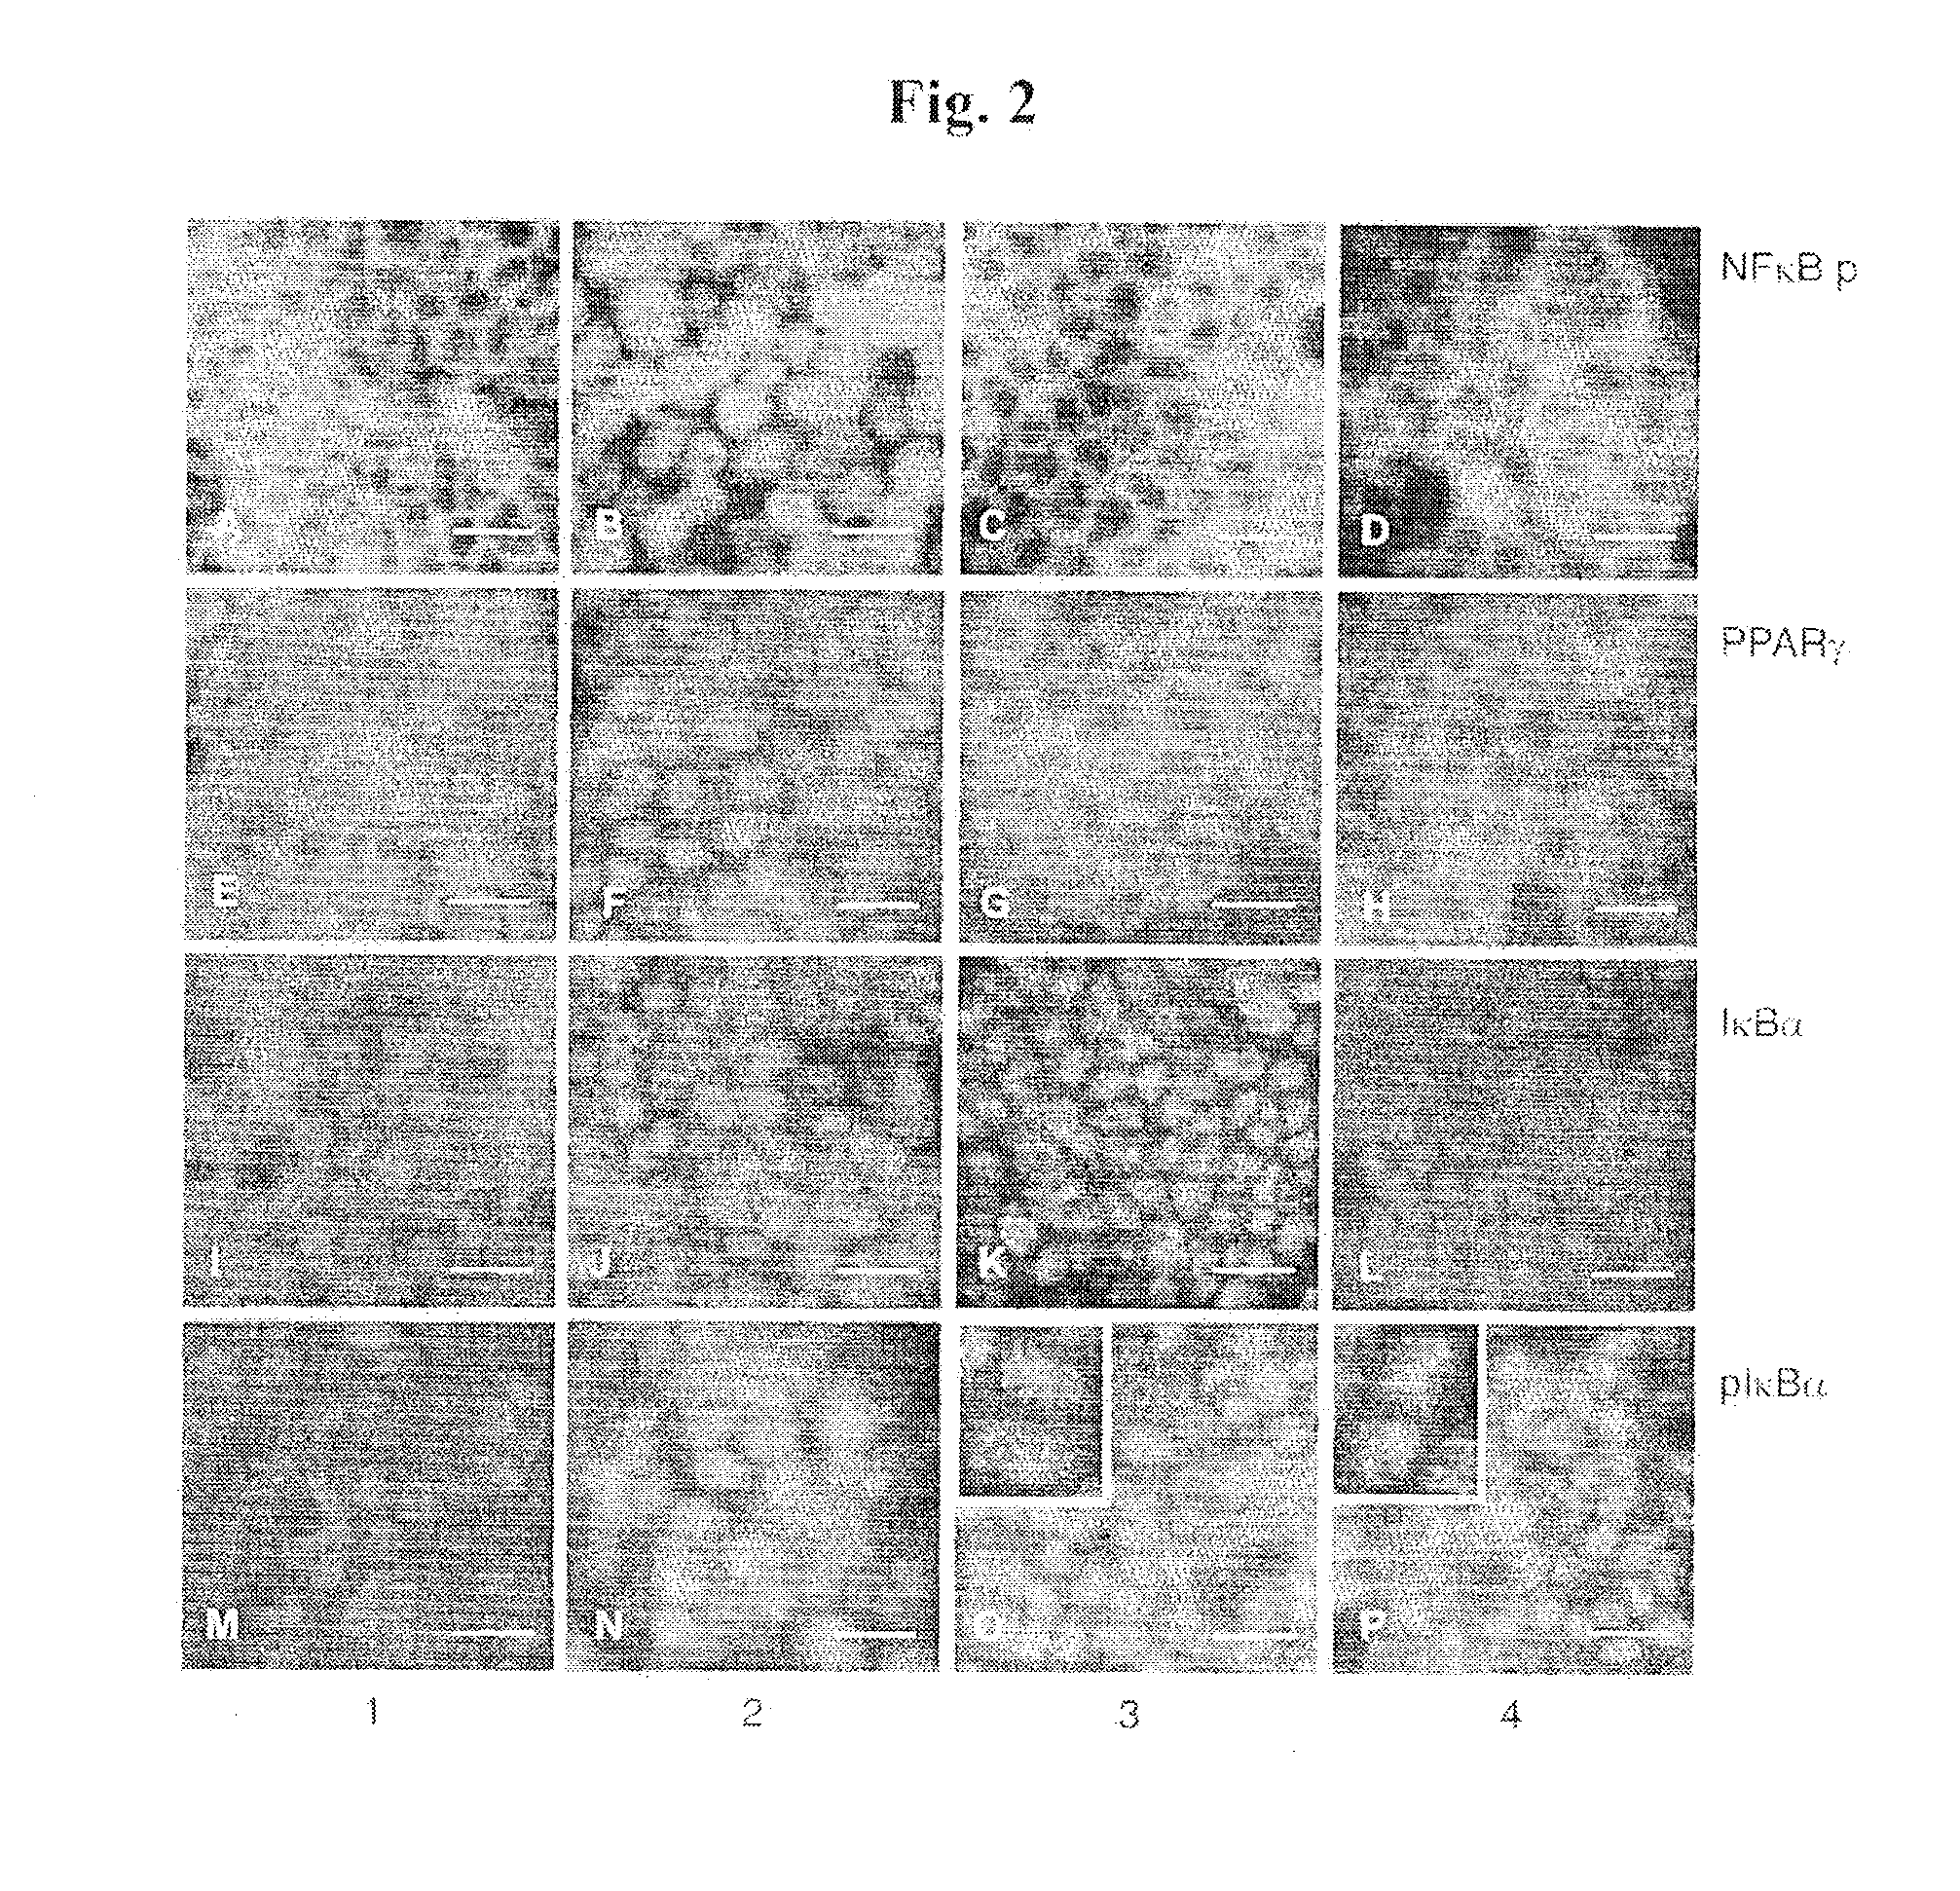 Methods for treating an inflammatory disease of the bowel